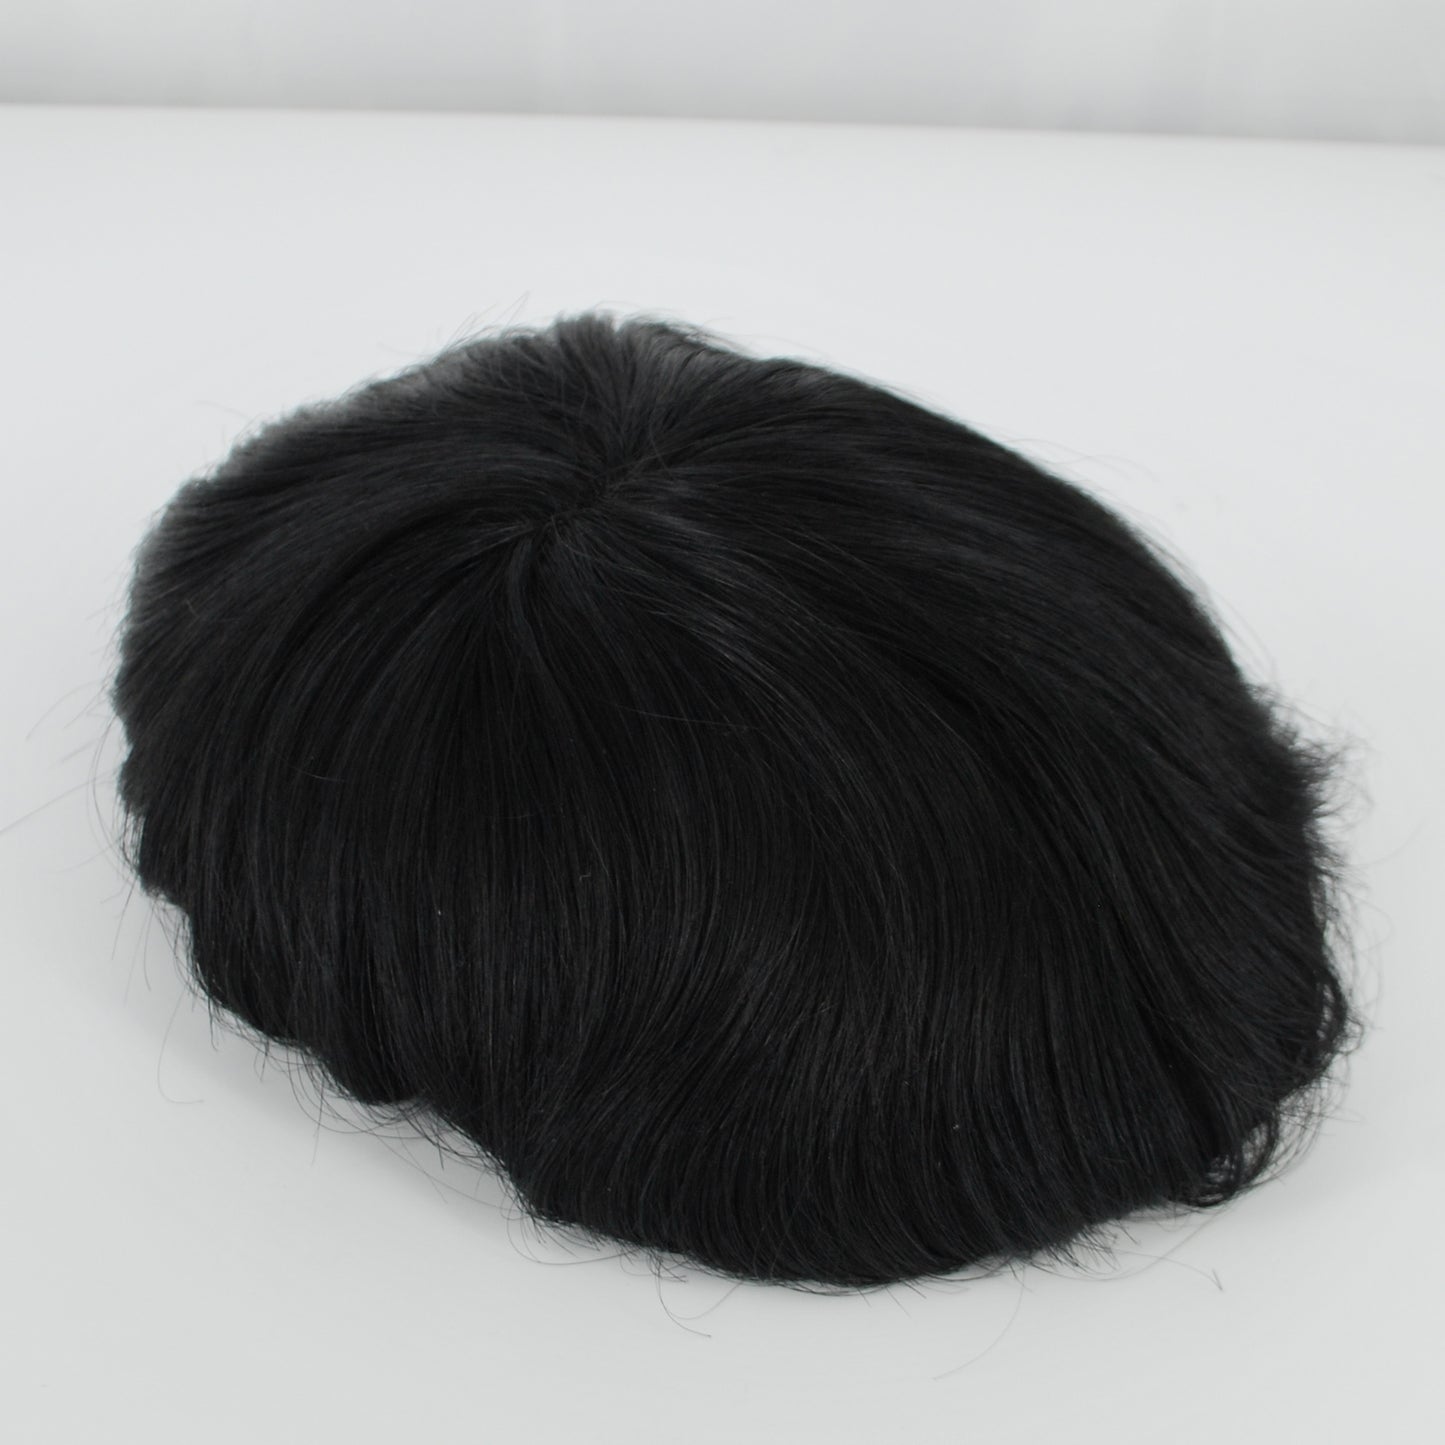 Clearance #1 juet black full lace men's toupee wig 9x7 inch human hair system hair replacement all French lace